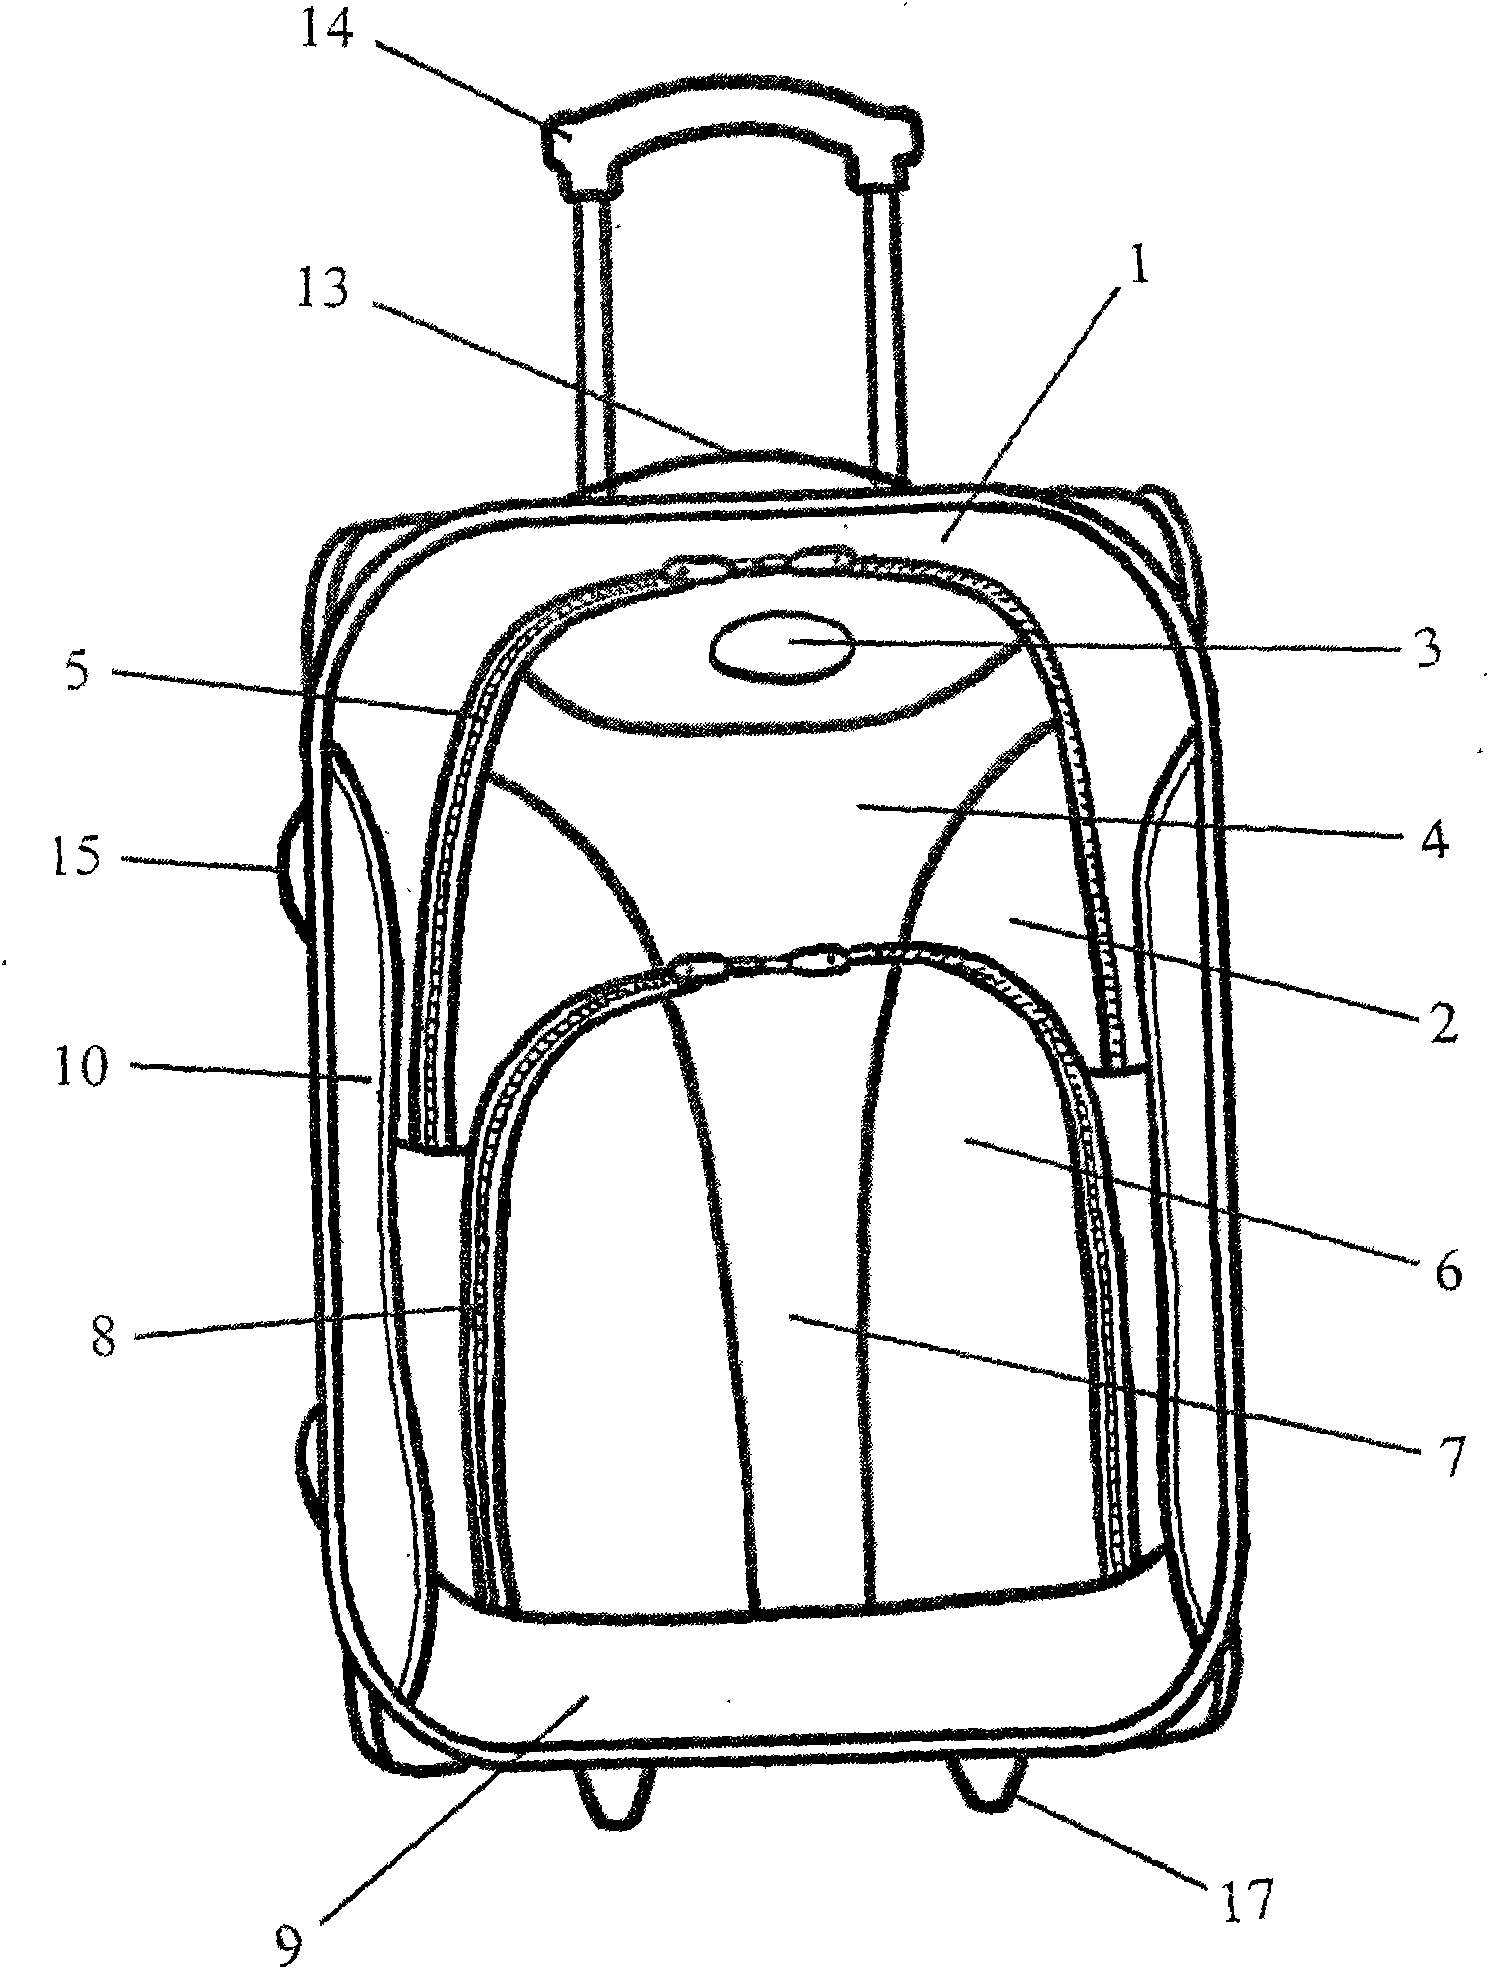 Draw-bar box with ornaments and overlapped lower convex bag and upper convex bag